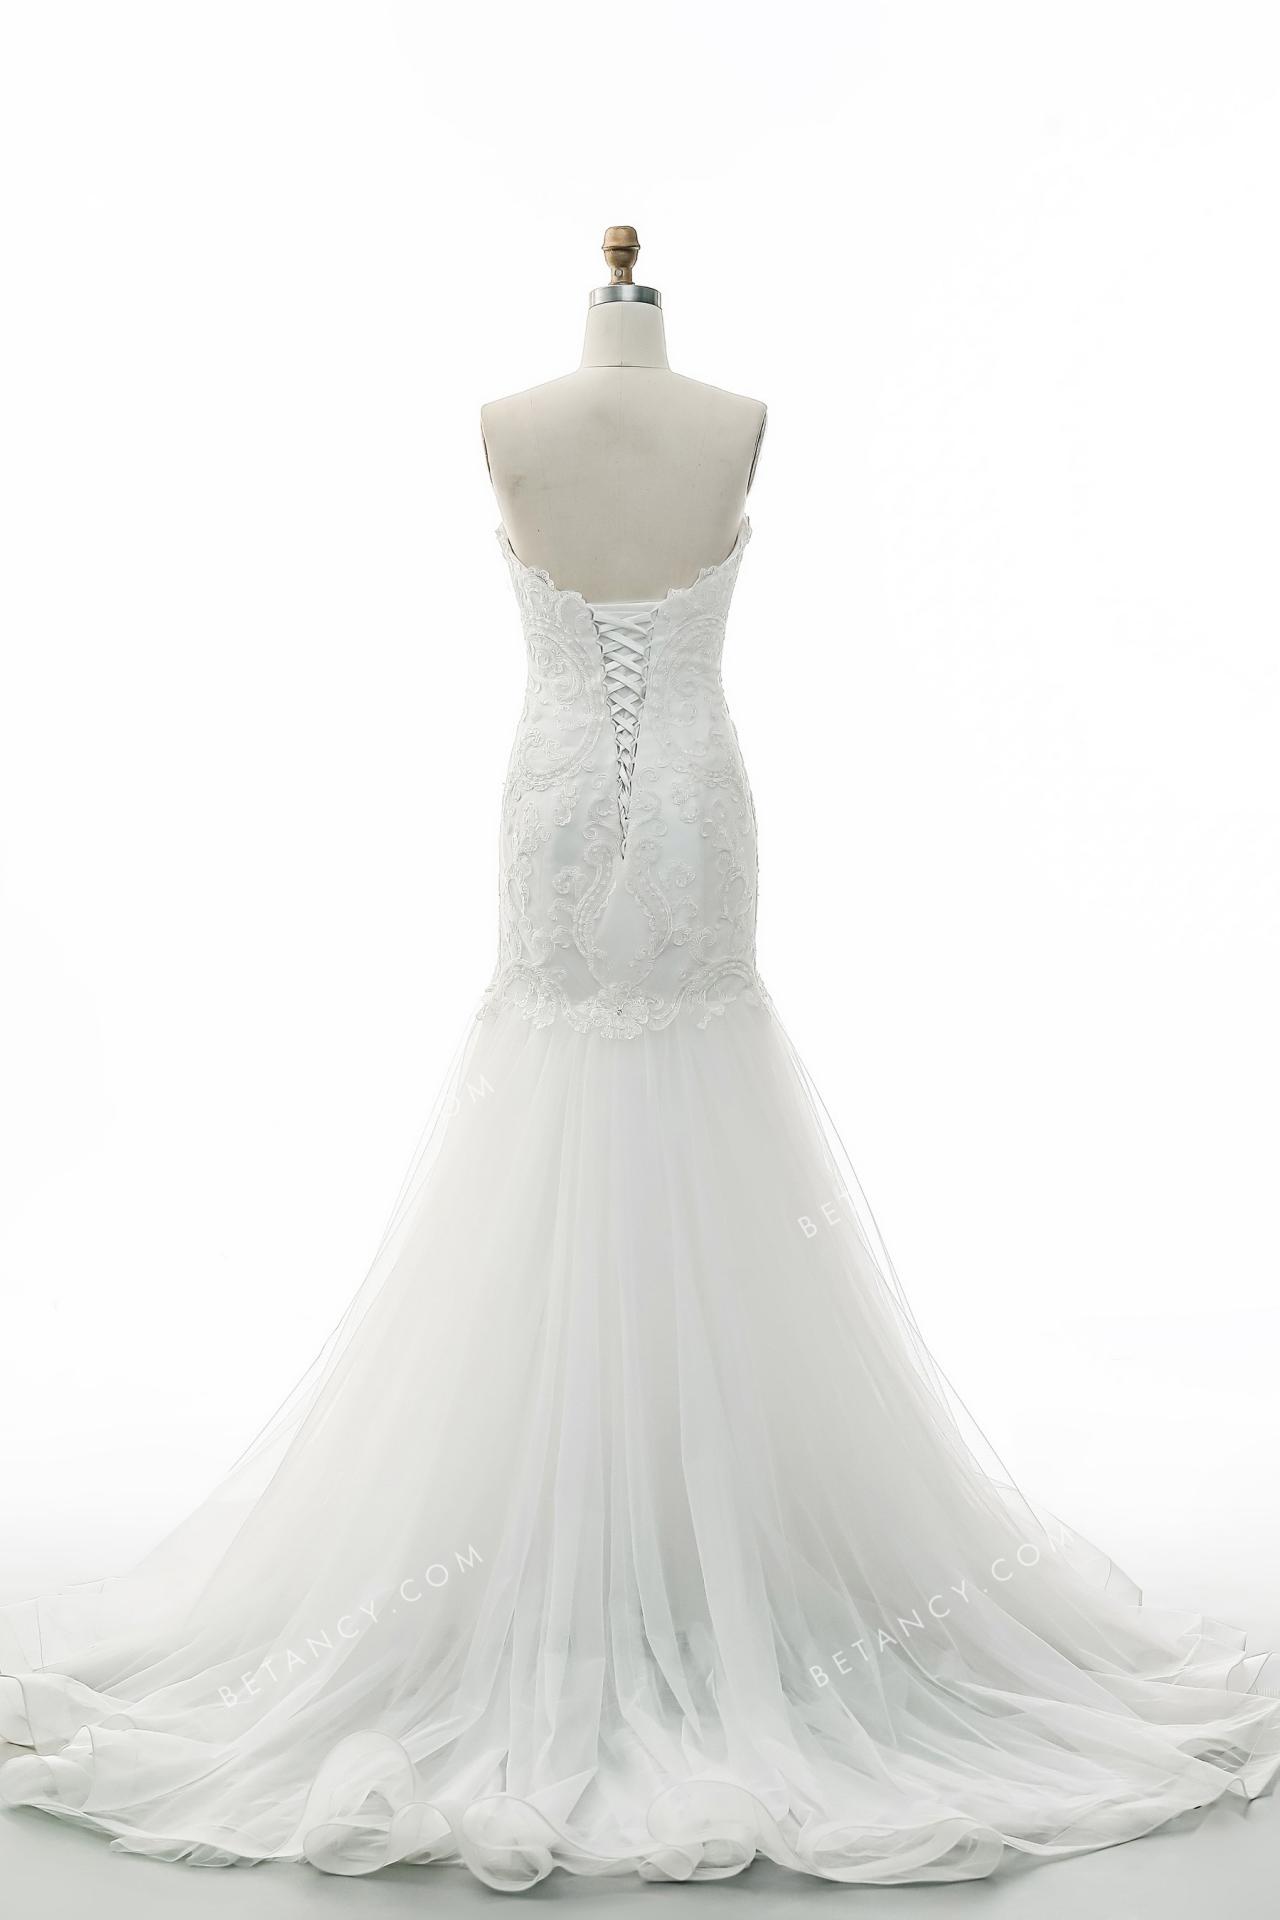 Breathtaking mermaid bridal gown designed with practical lace up back closure 6